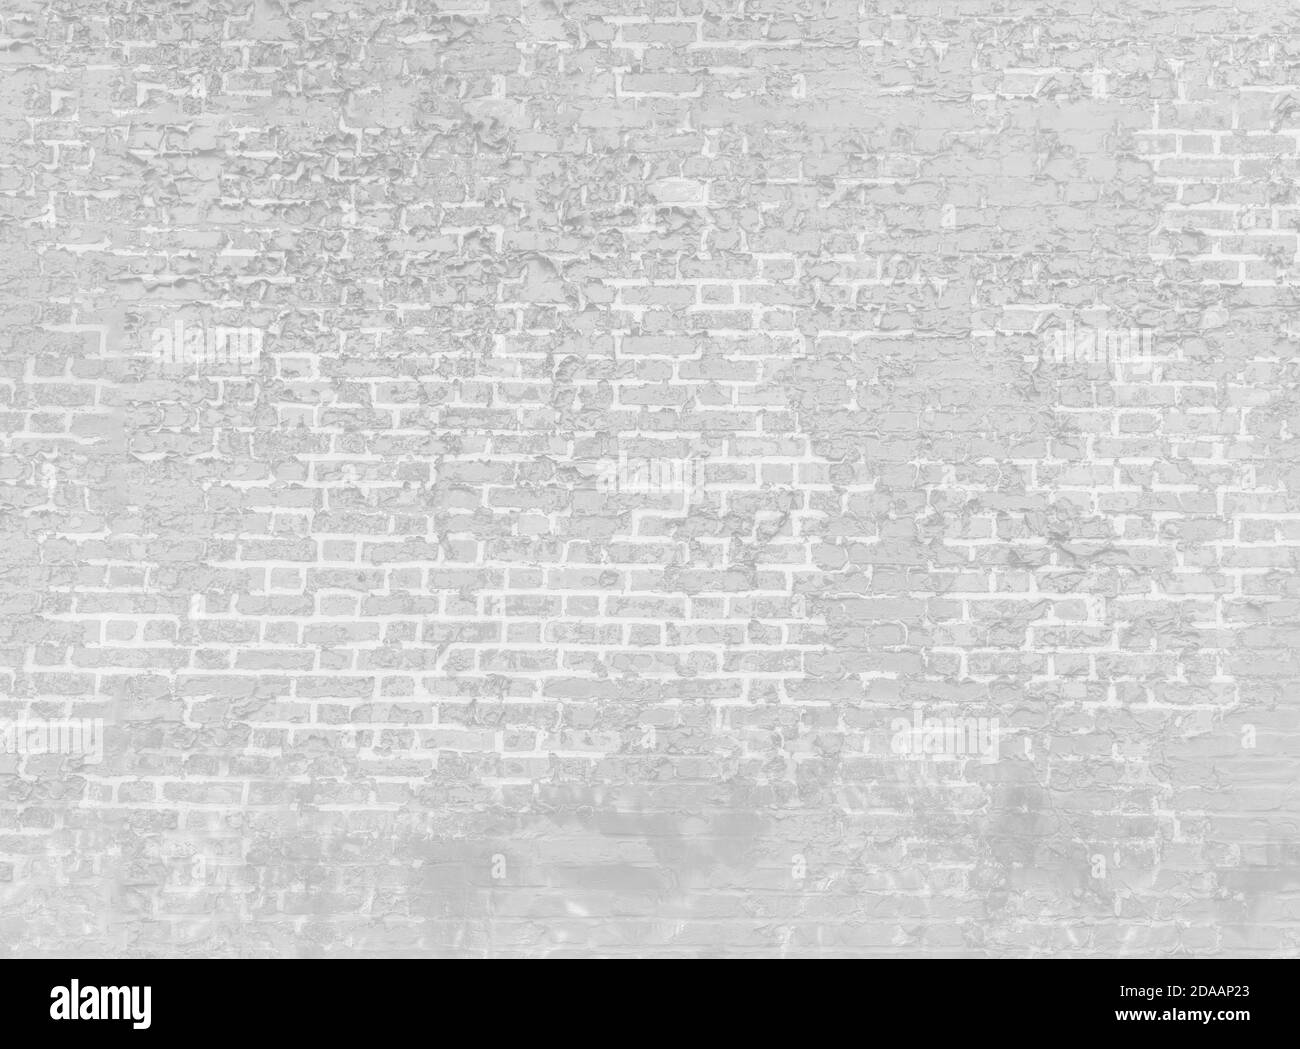 Abstract light gray background. Vintage bricklaying structure. Brick wall background Stock Photo